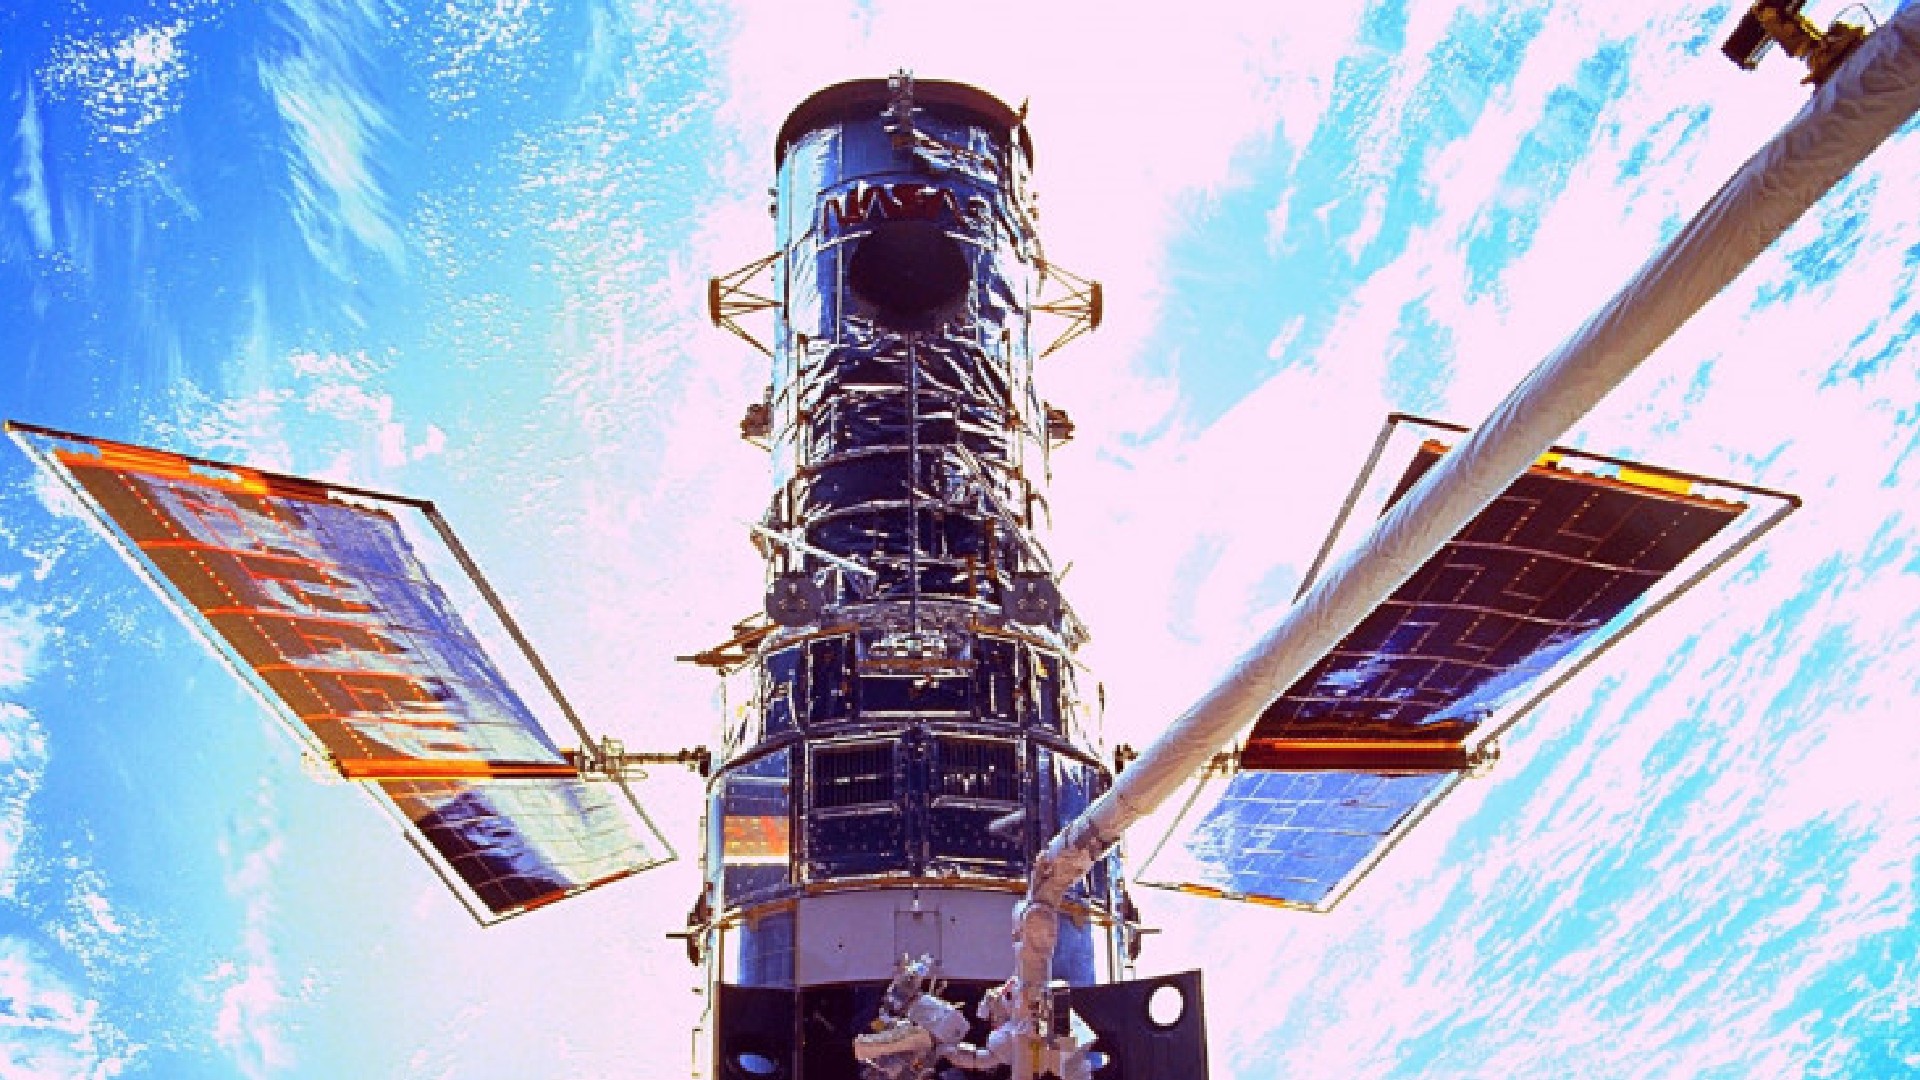 After a memory swap failed, NASA is still trying to revive the Hubble Telescope